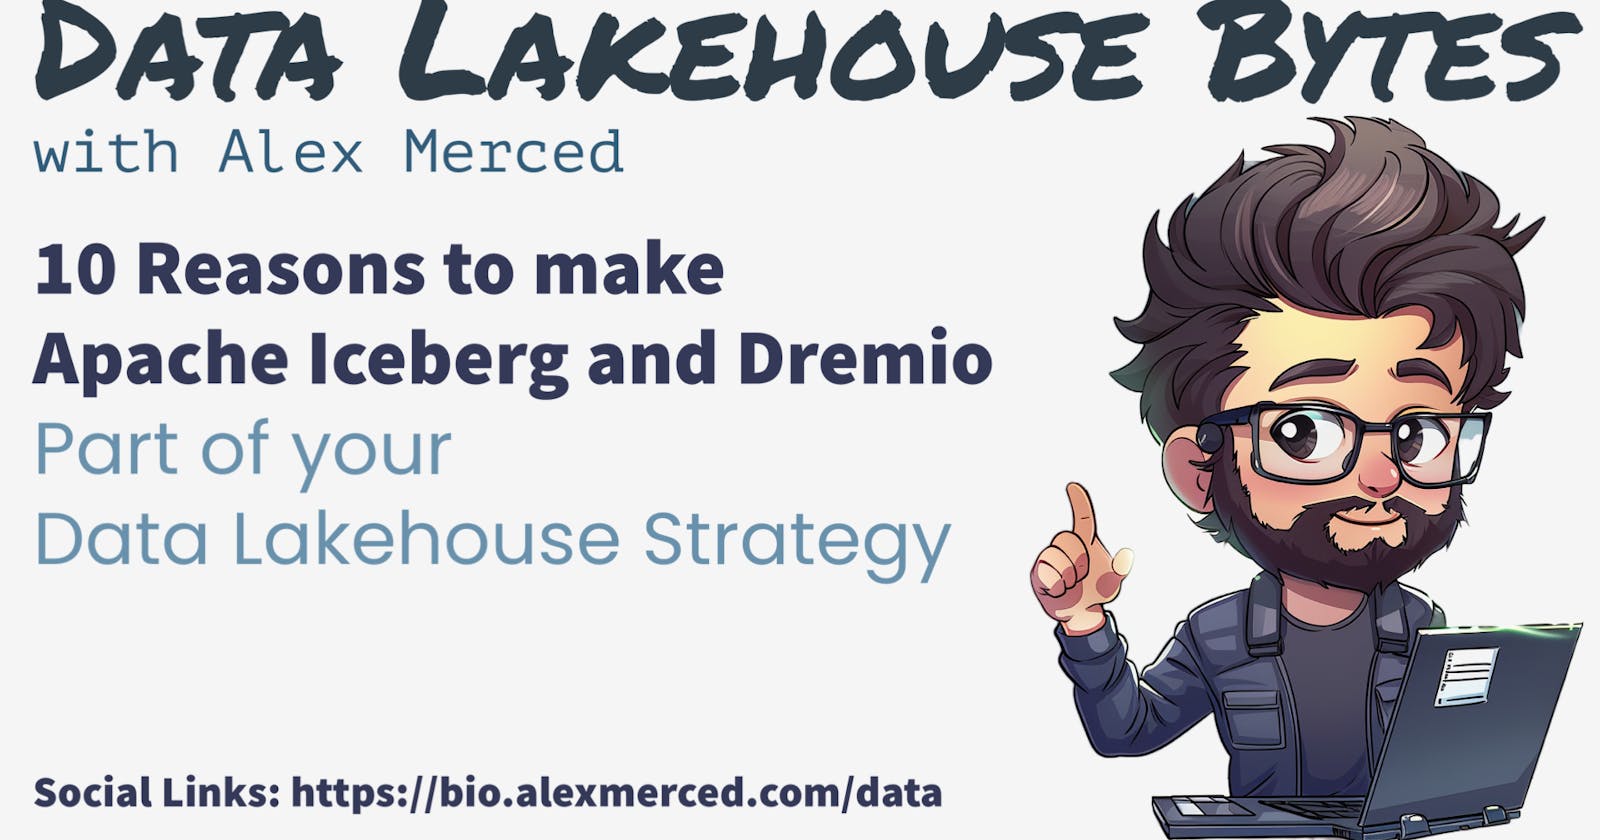 10 Reasons to Make Apache Iceberg and Dremio Part of Your Data Lakehouse Strategy